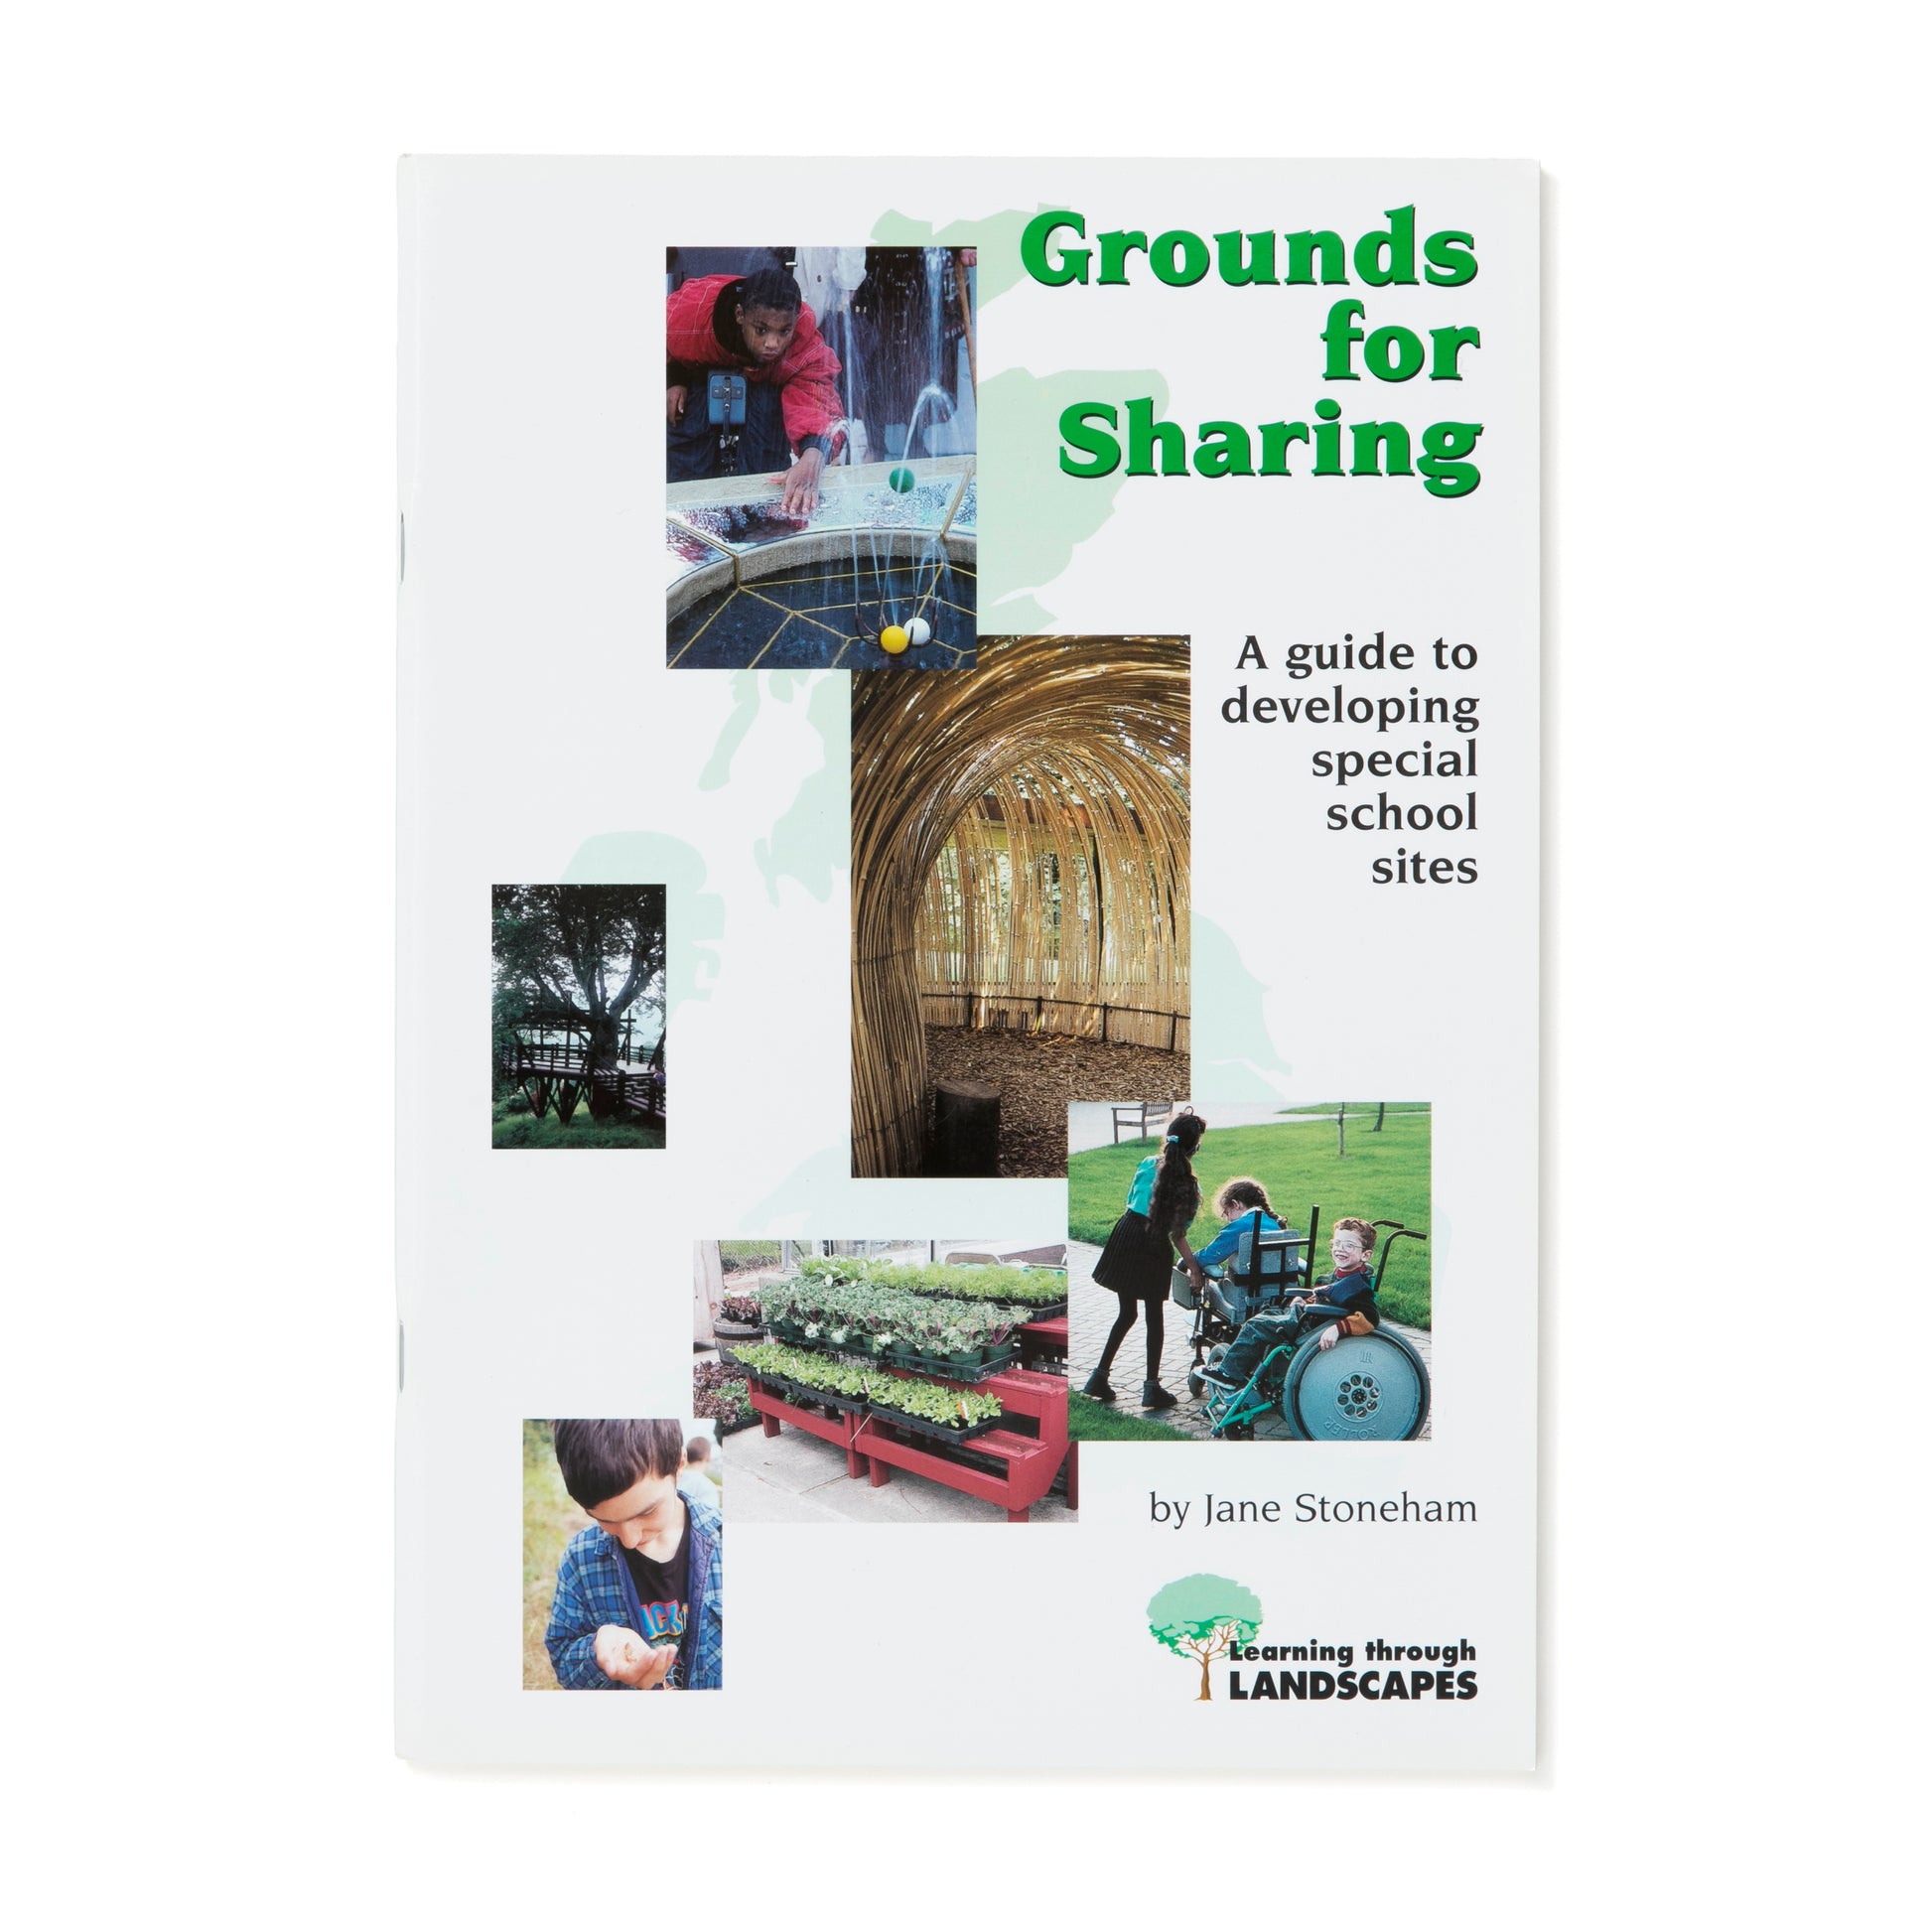 Grounds for sharing text book by Sensory Trust on a white background